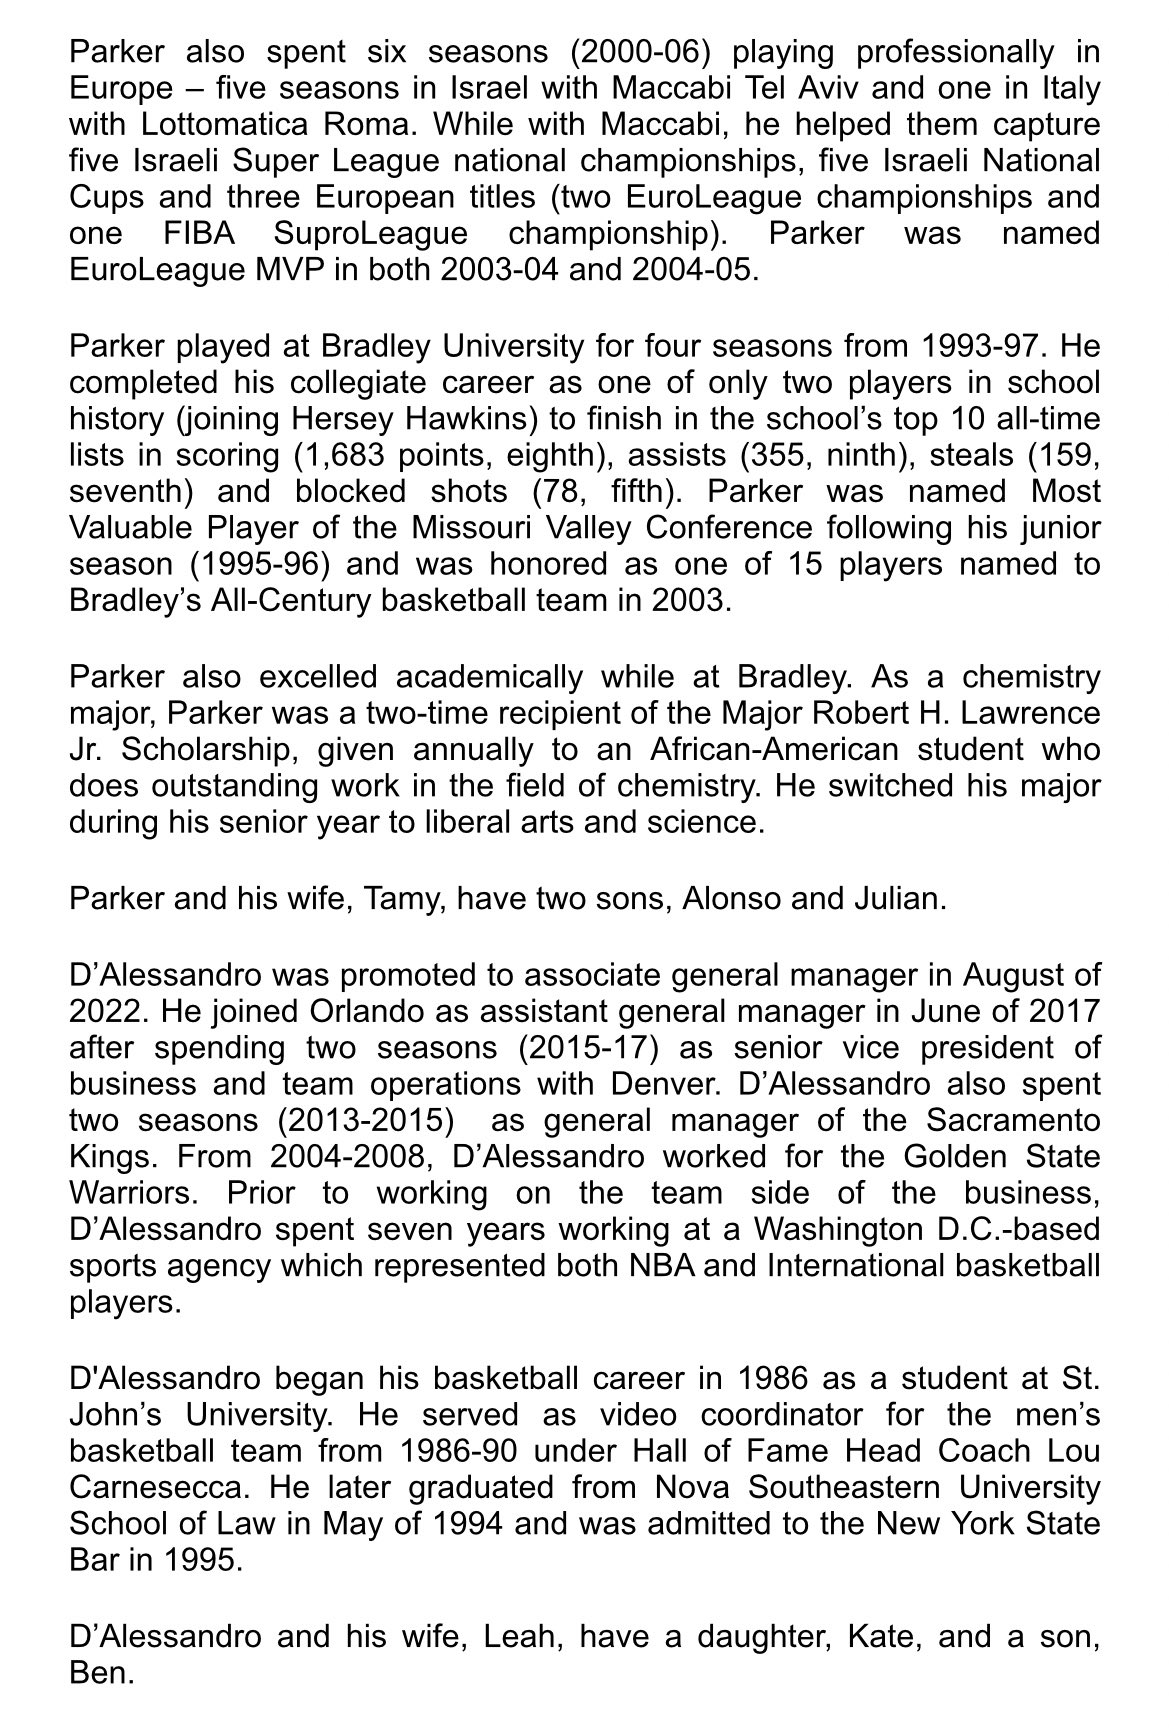 Anthony Parker Takes the Reins as Orlando Magic's New General Manager + Full Press Release Of Orlando’s Basketball Operations.